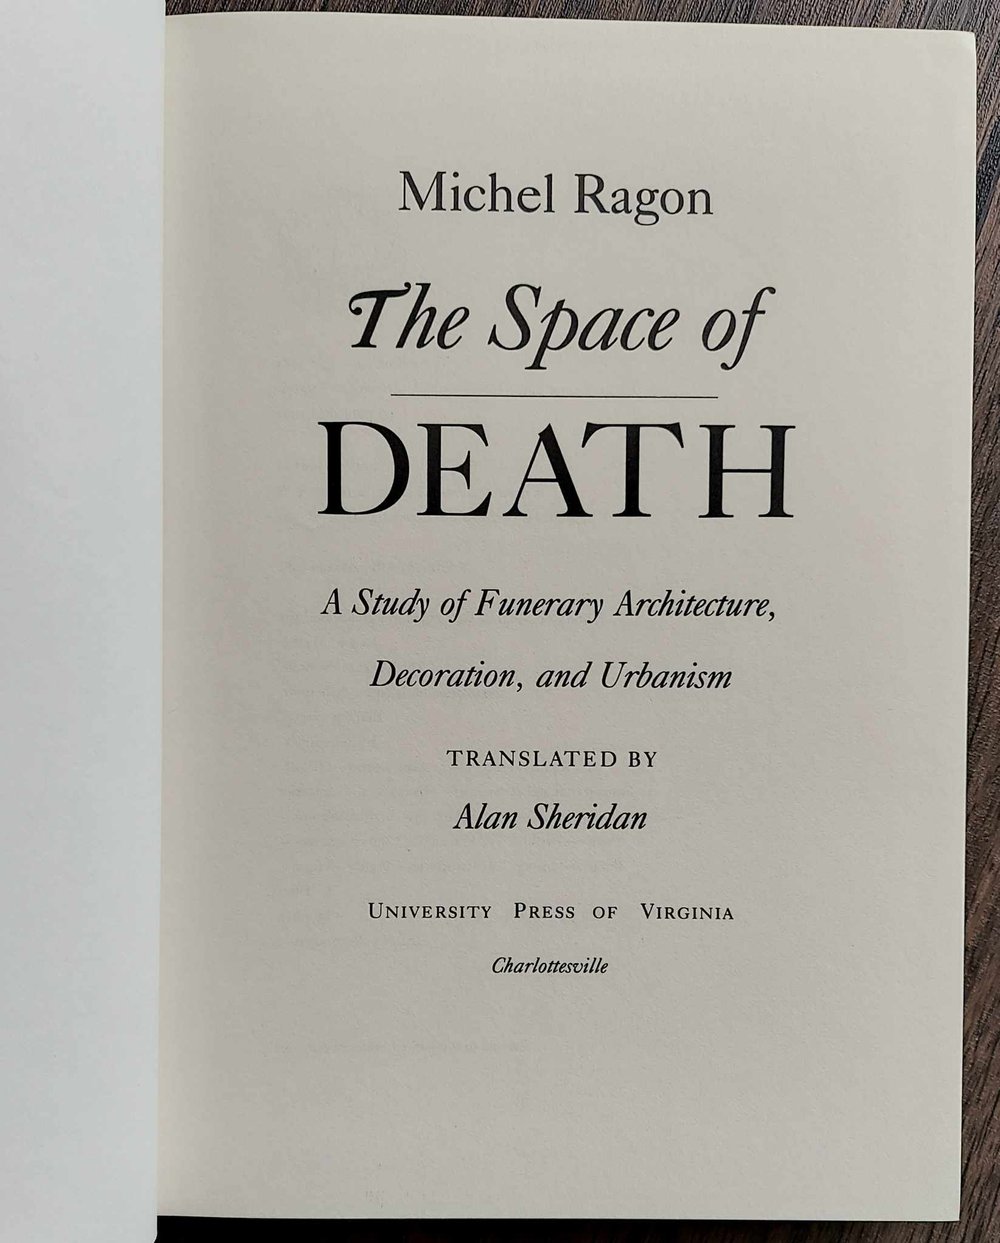 The Space of Death - A Study of Funerary Architecture, Decoration, and Urbanism, by Michel Ragon